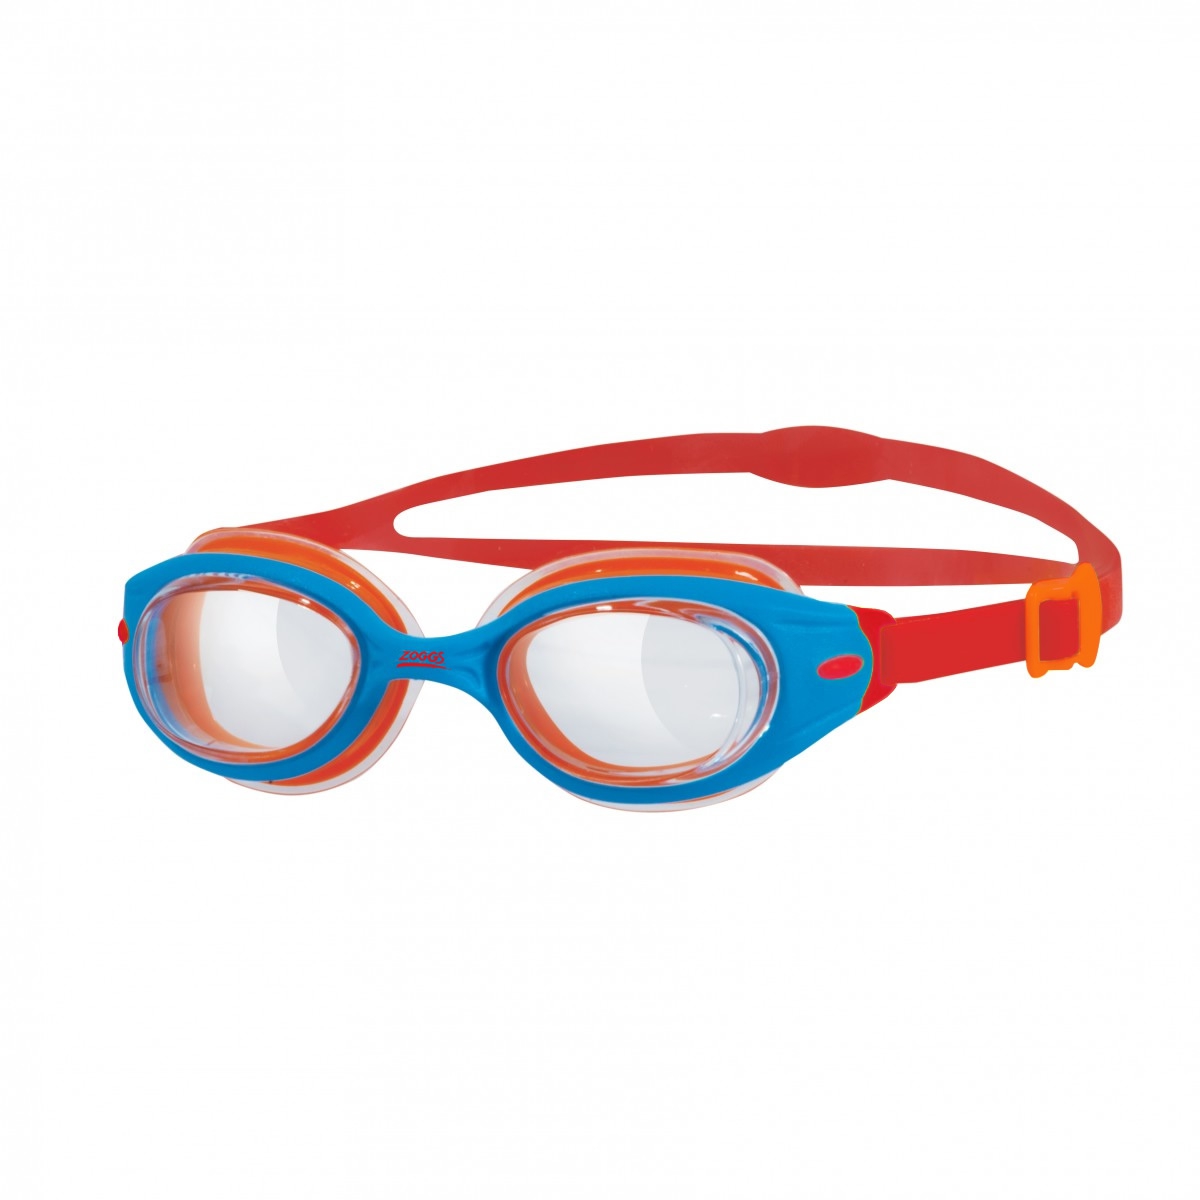 Little Sonic Air 'Blue' Swimming Goggles 0-6 Years Pool